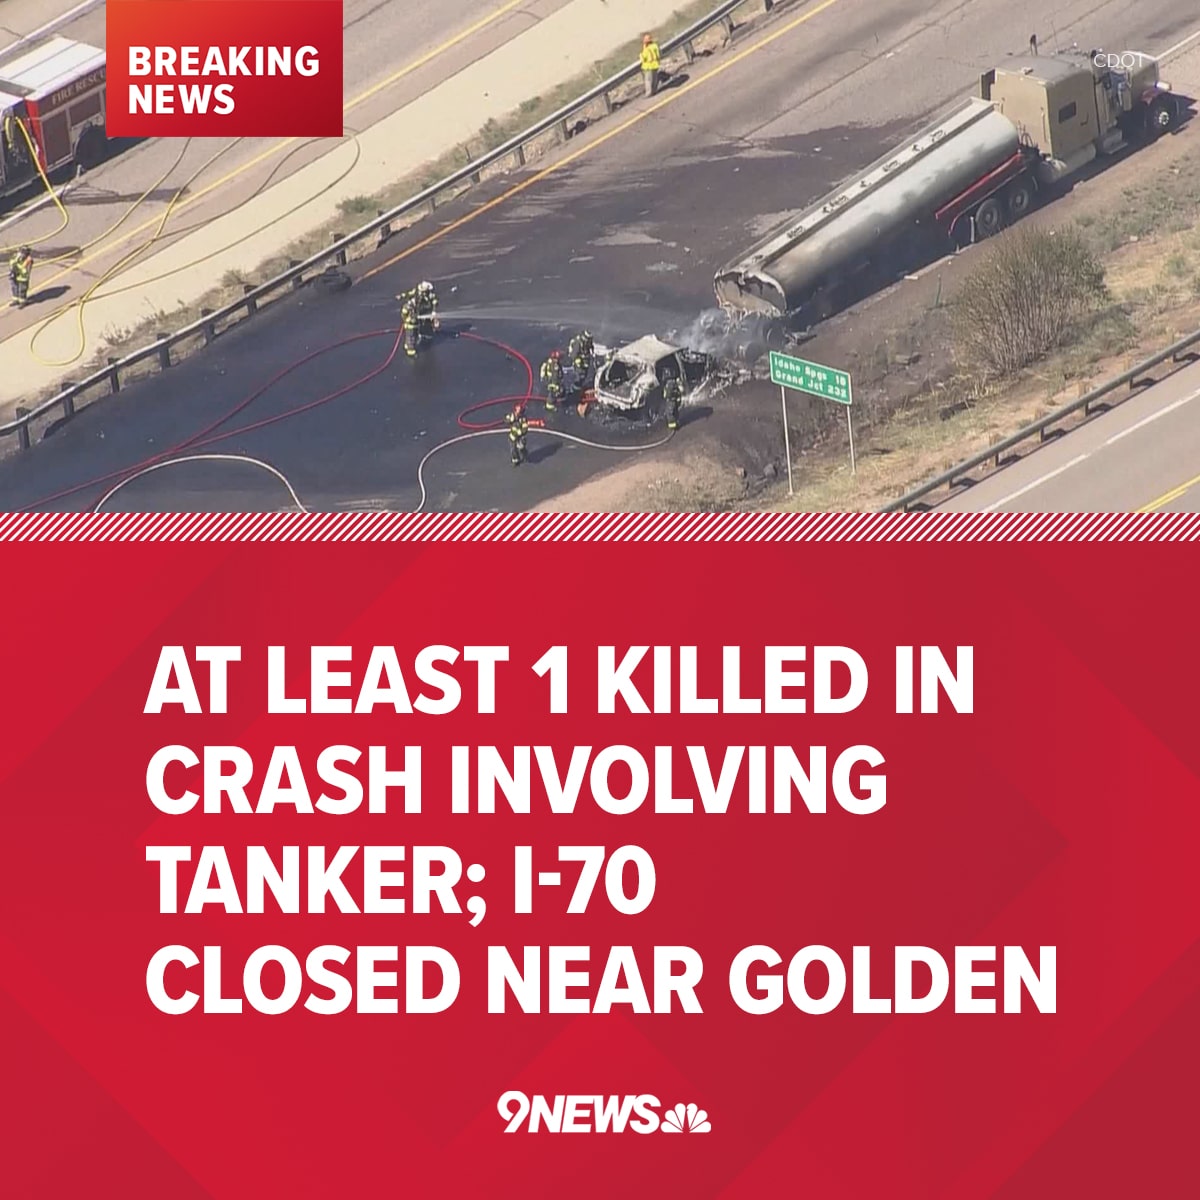 CSP has confirmed one person died in a crash involving a tanker and a vehicle on I-70